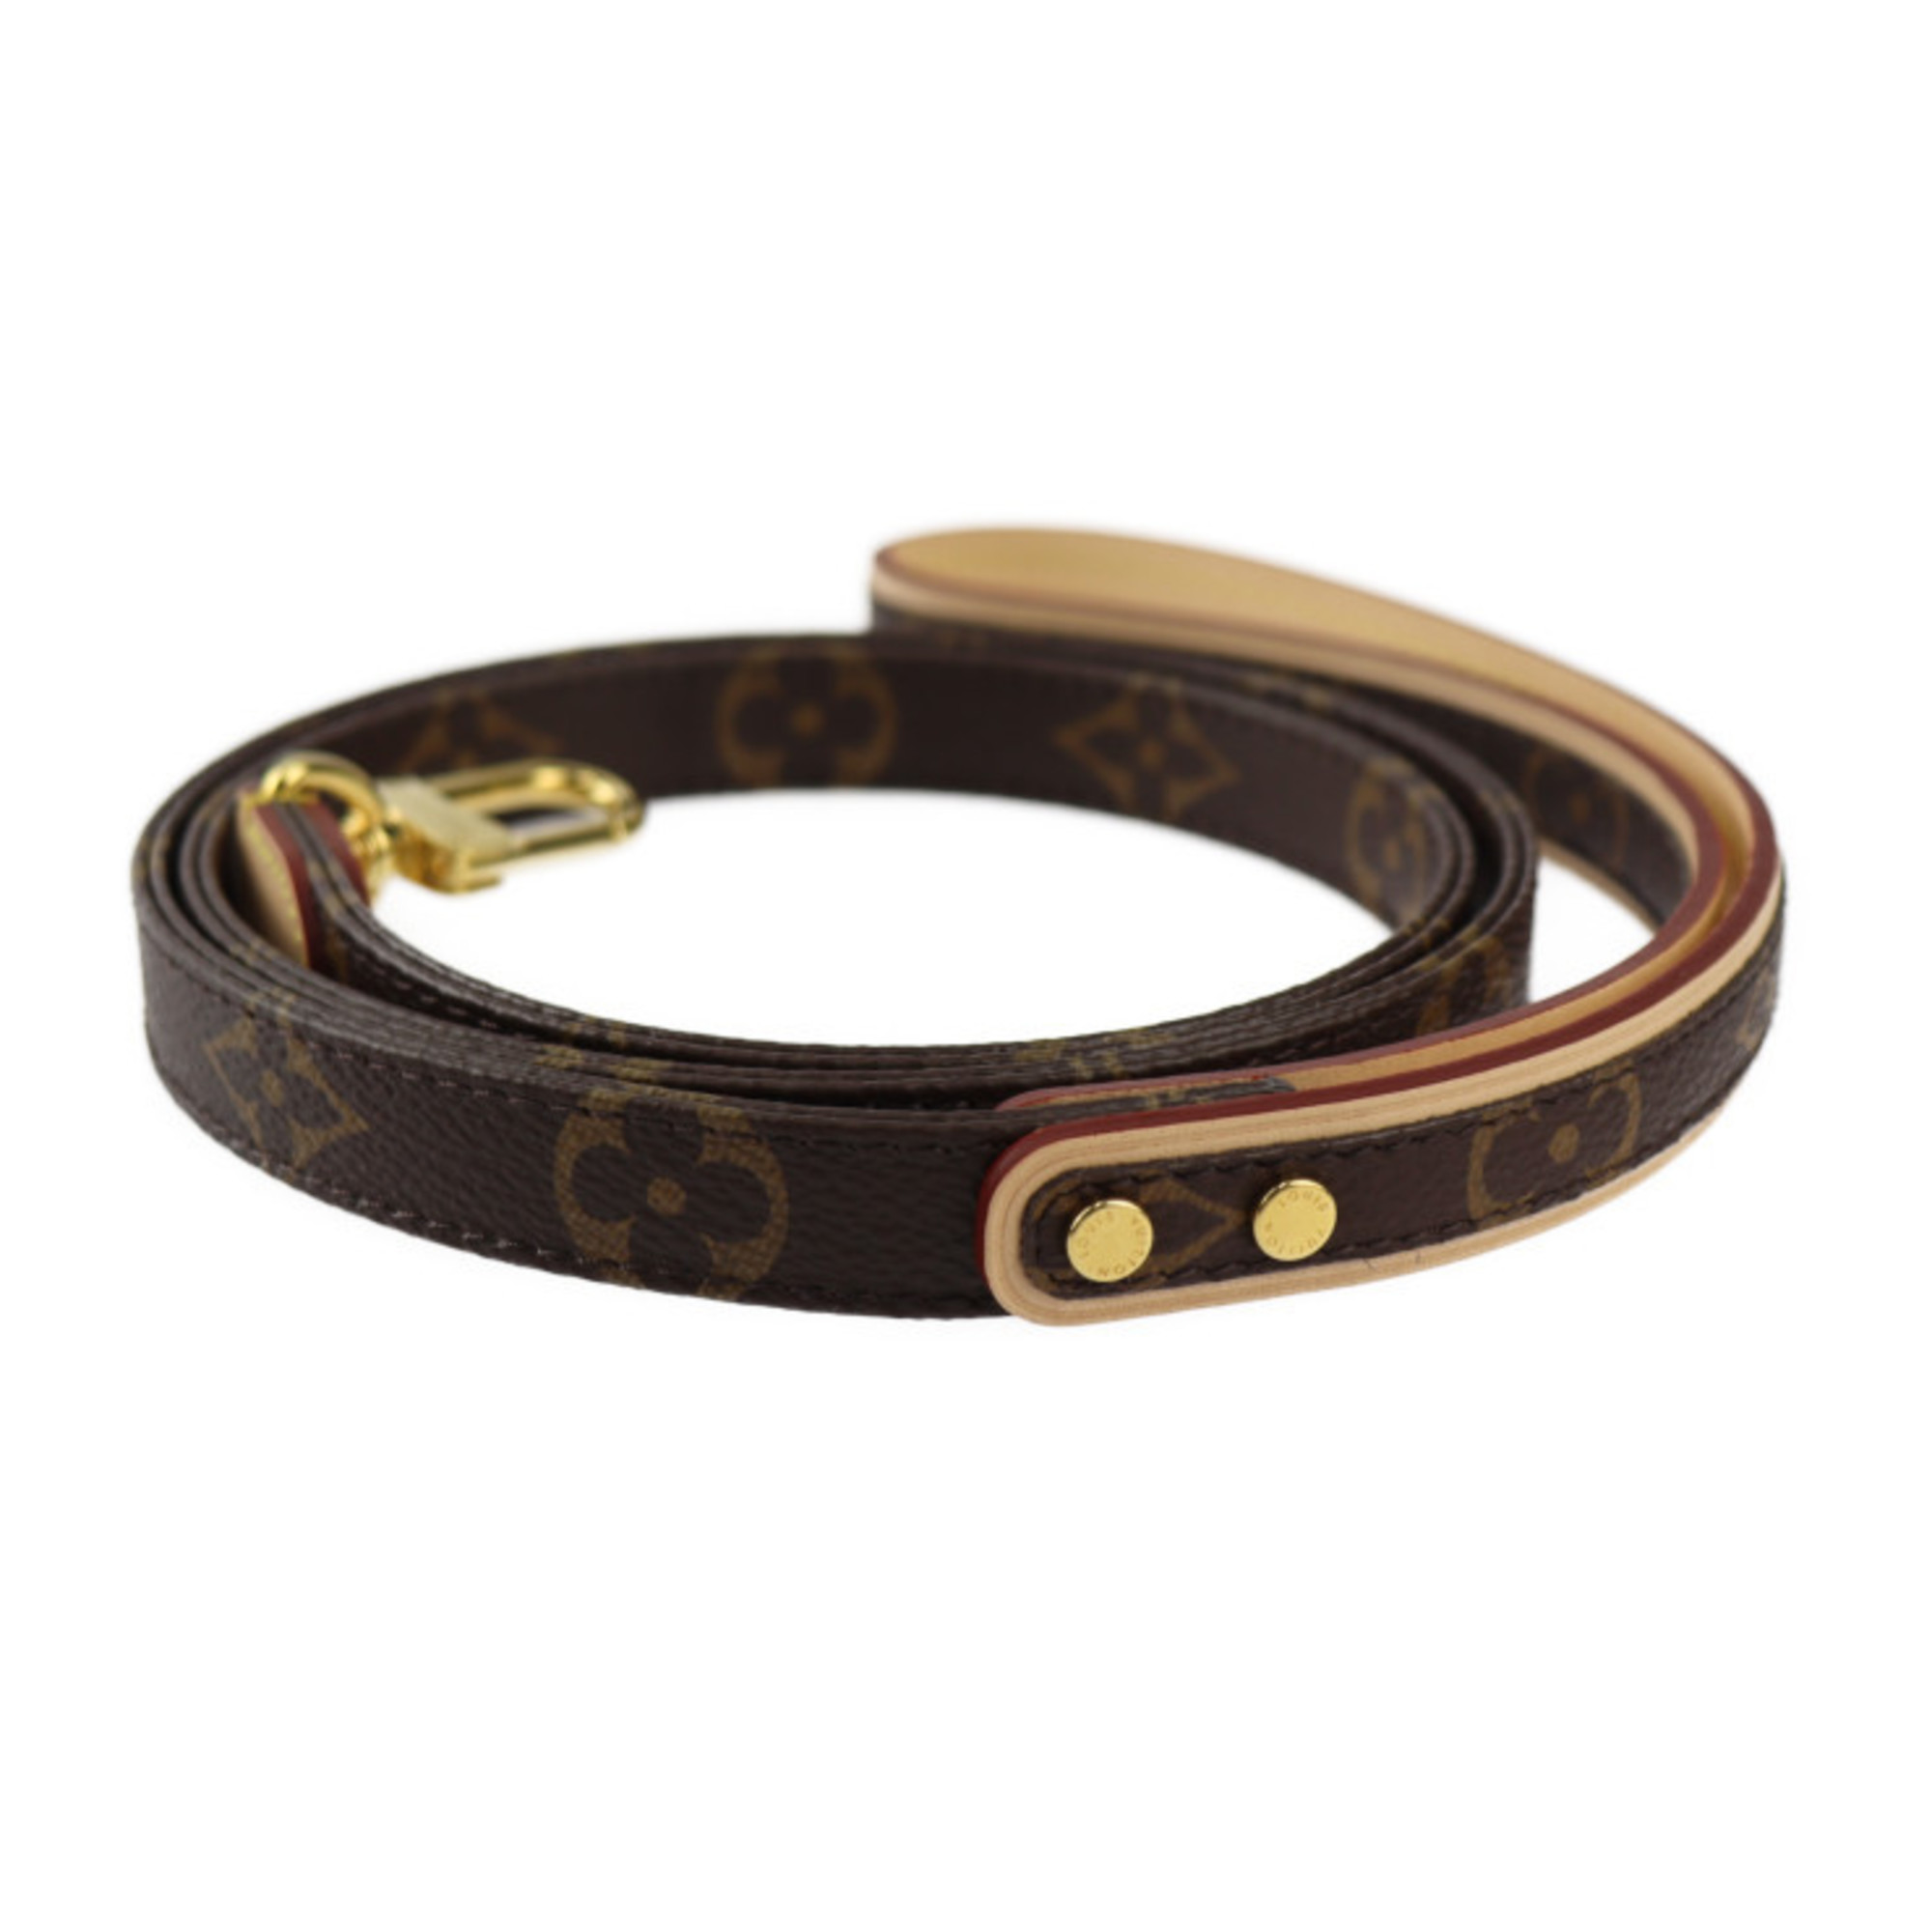 LOUIS VUITTON Dog Leash Other Miscellaneous Goods M80338 Monogram Canvas Leather Brown Gold Hardware Lead for Medium Dogs Pet Supplies